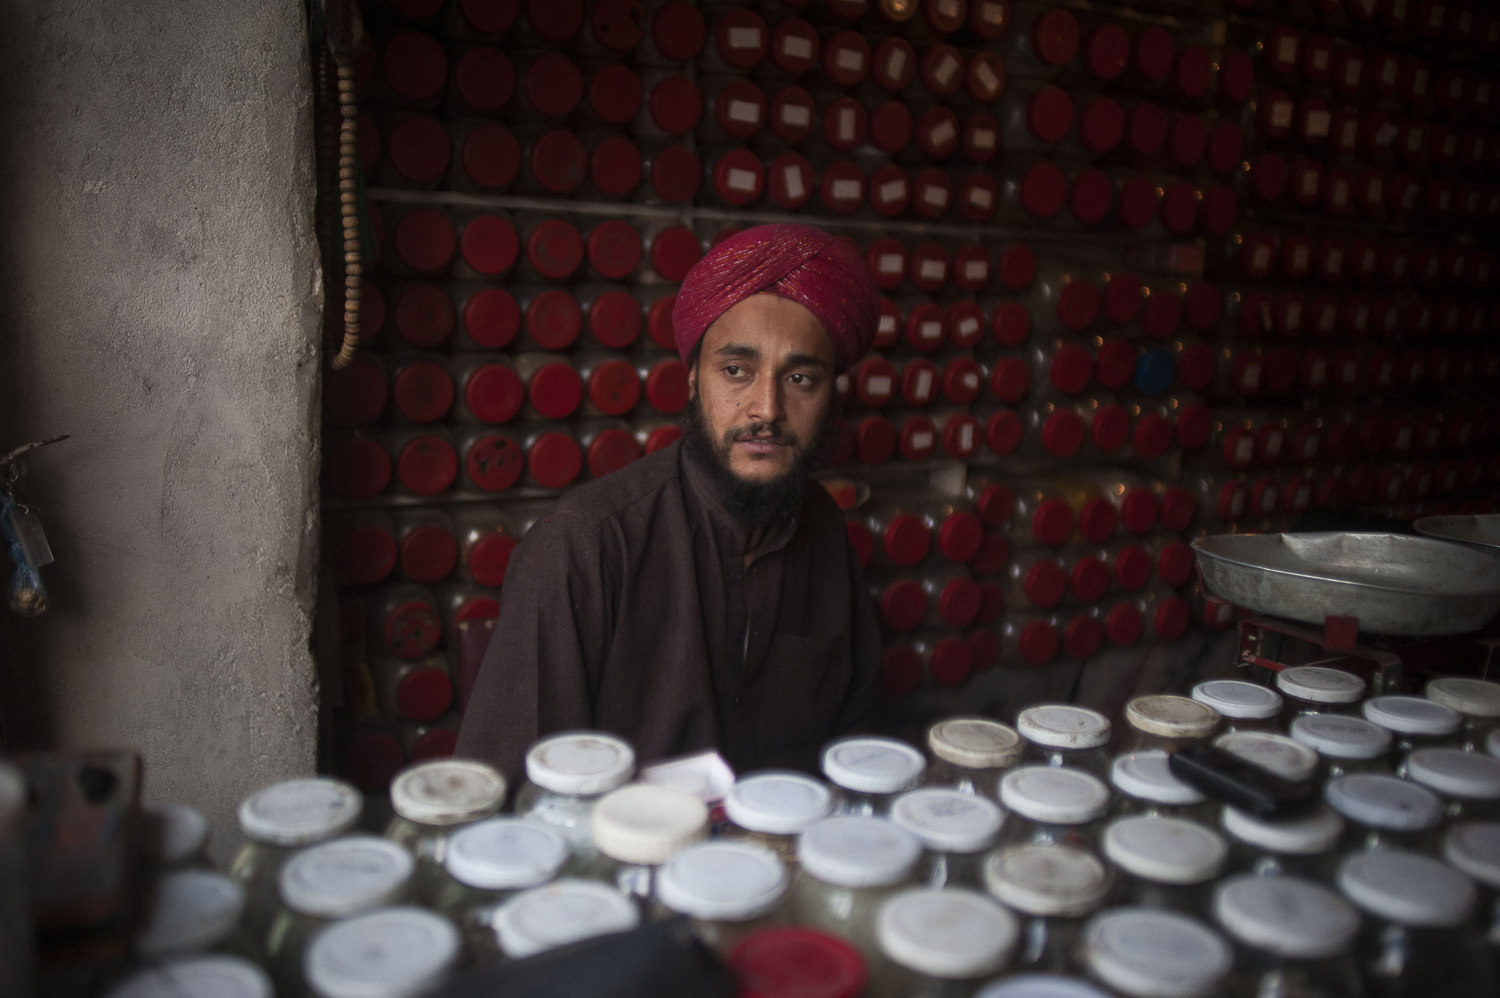  A sikh medicine man in his shop in downtown Kabul, Afghanistan. 